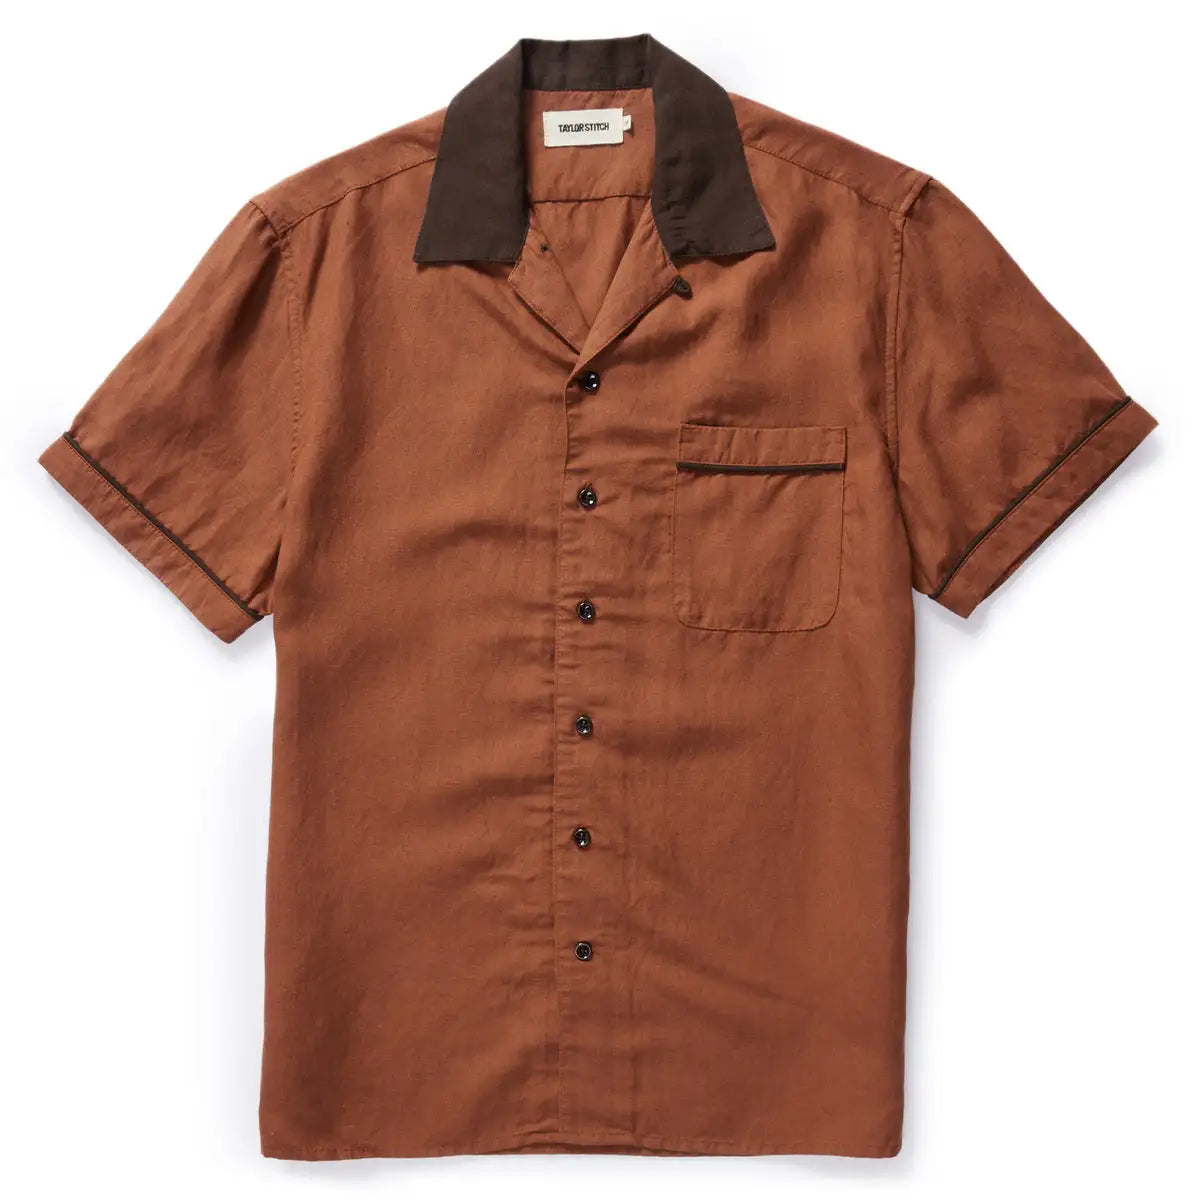 Taylor Stitch - TAYLOR STITCH THE PALMER SHIRT IN DRIED GUAJILLO - Rent With Thred